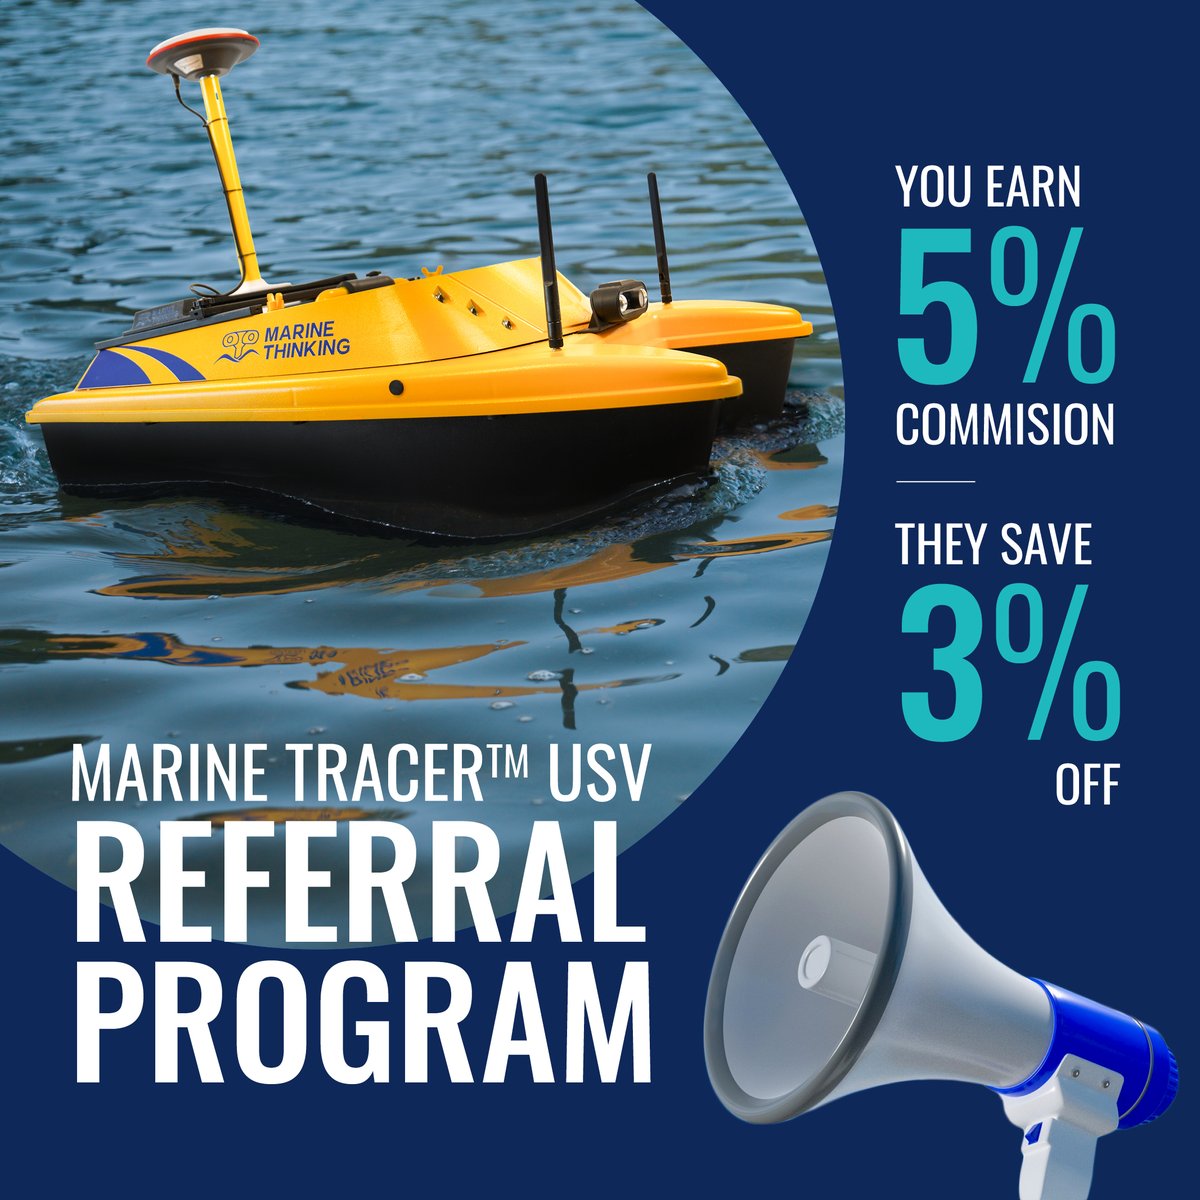 Today, we officially launch our Marine Tracer™ USV Referral Program. Authorized referrers will receive a 5% #commission while referred customers will receive a 3% #discount off their purchase.

Learn more about the #referralprogram at marinethinking.com/referral